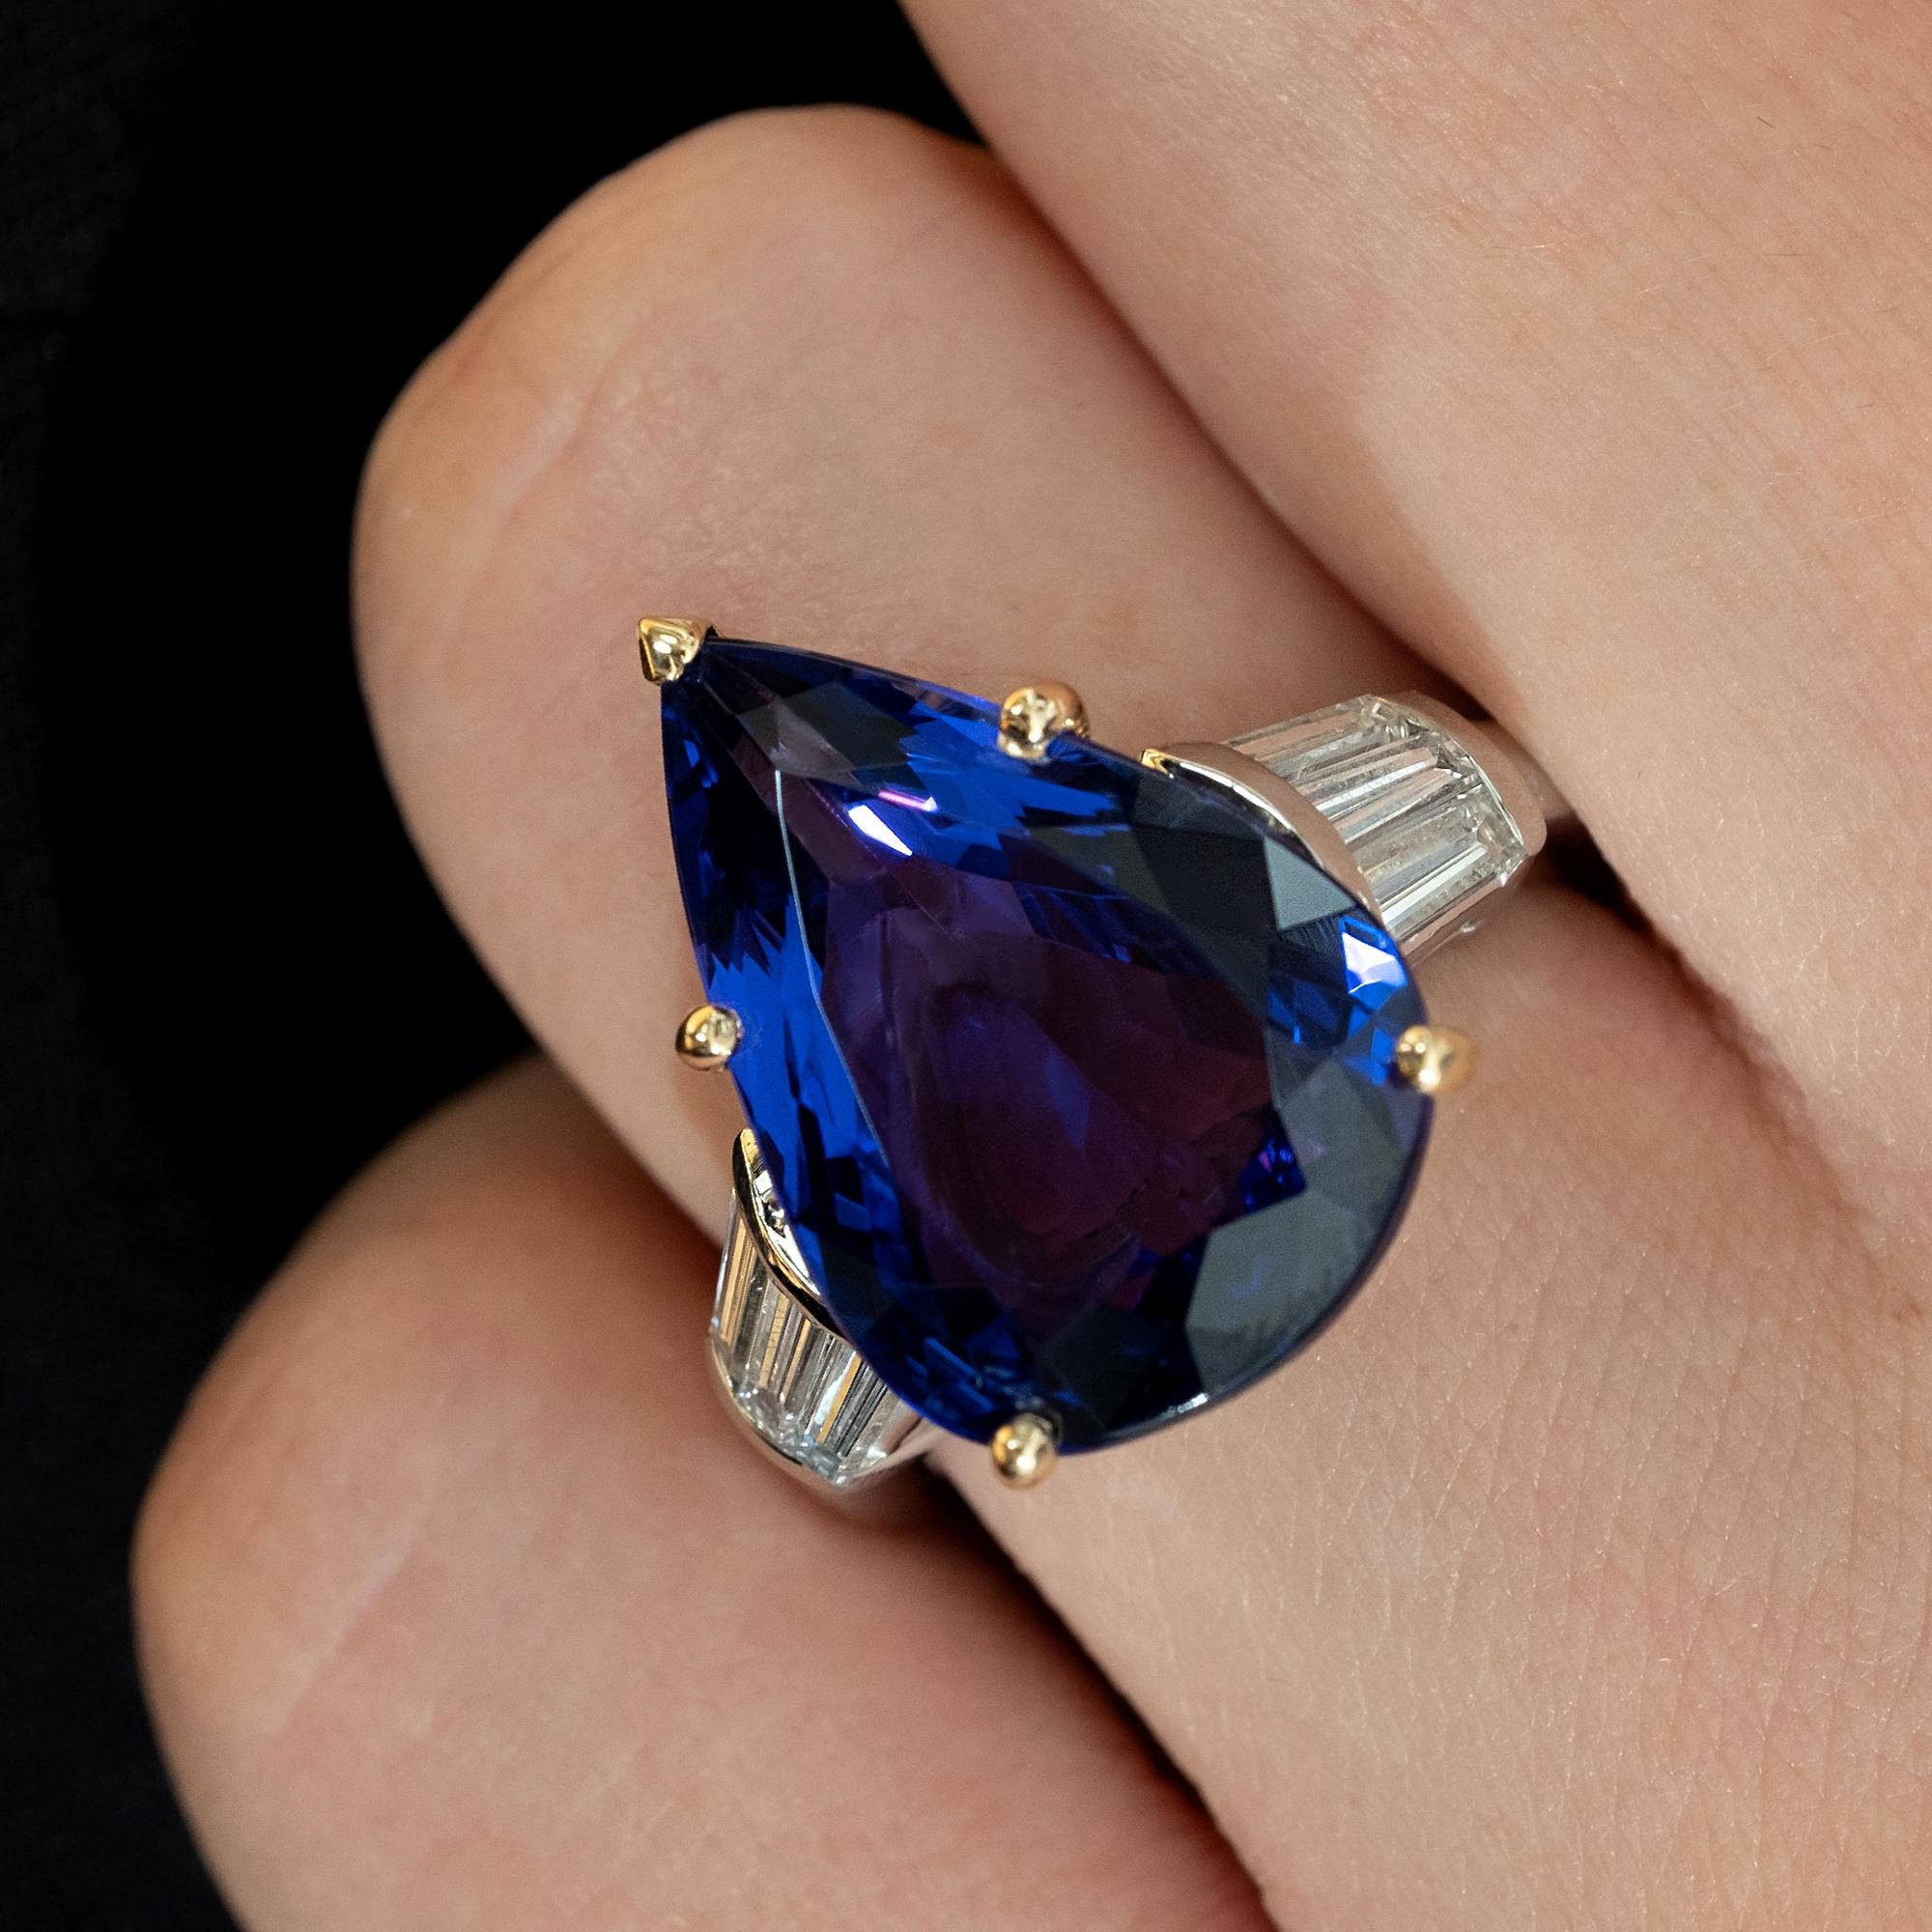 SUPER Fine Tanzanite is one of the most beautiful gemstone in the treasure of Mother Nature.
A RARE opportunity to own a HUGE and BEAUTIFUL Tanzanite ring with true substance! The total weight of the Gems is just shy 12.01ct.

The Tanzanite is